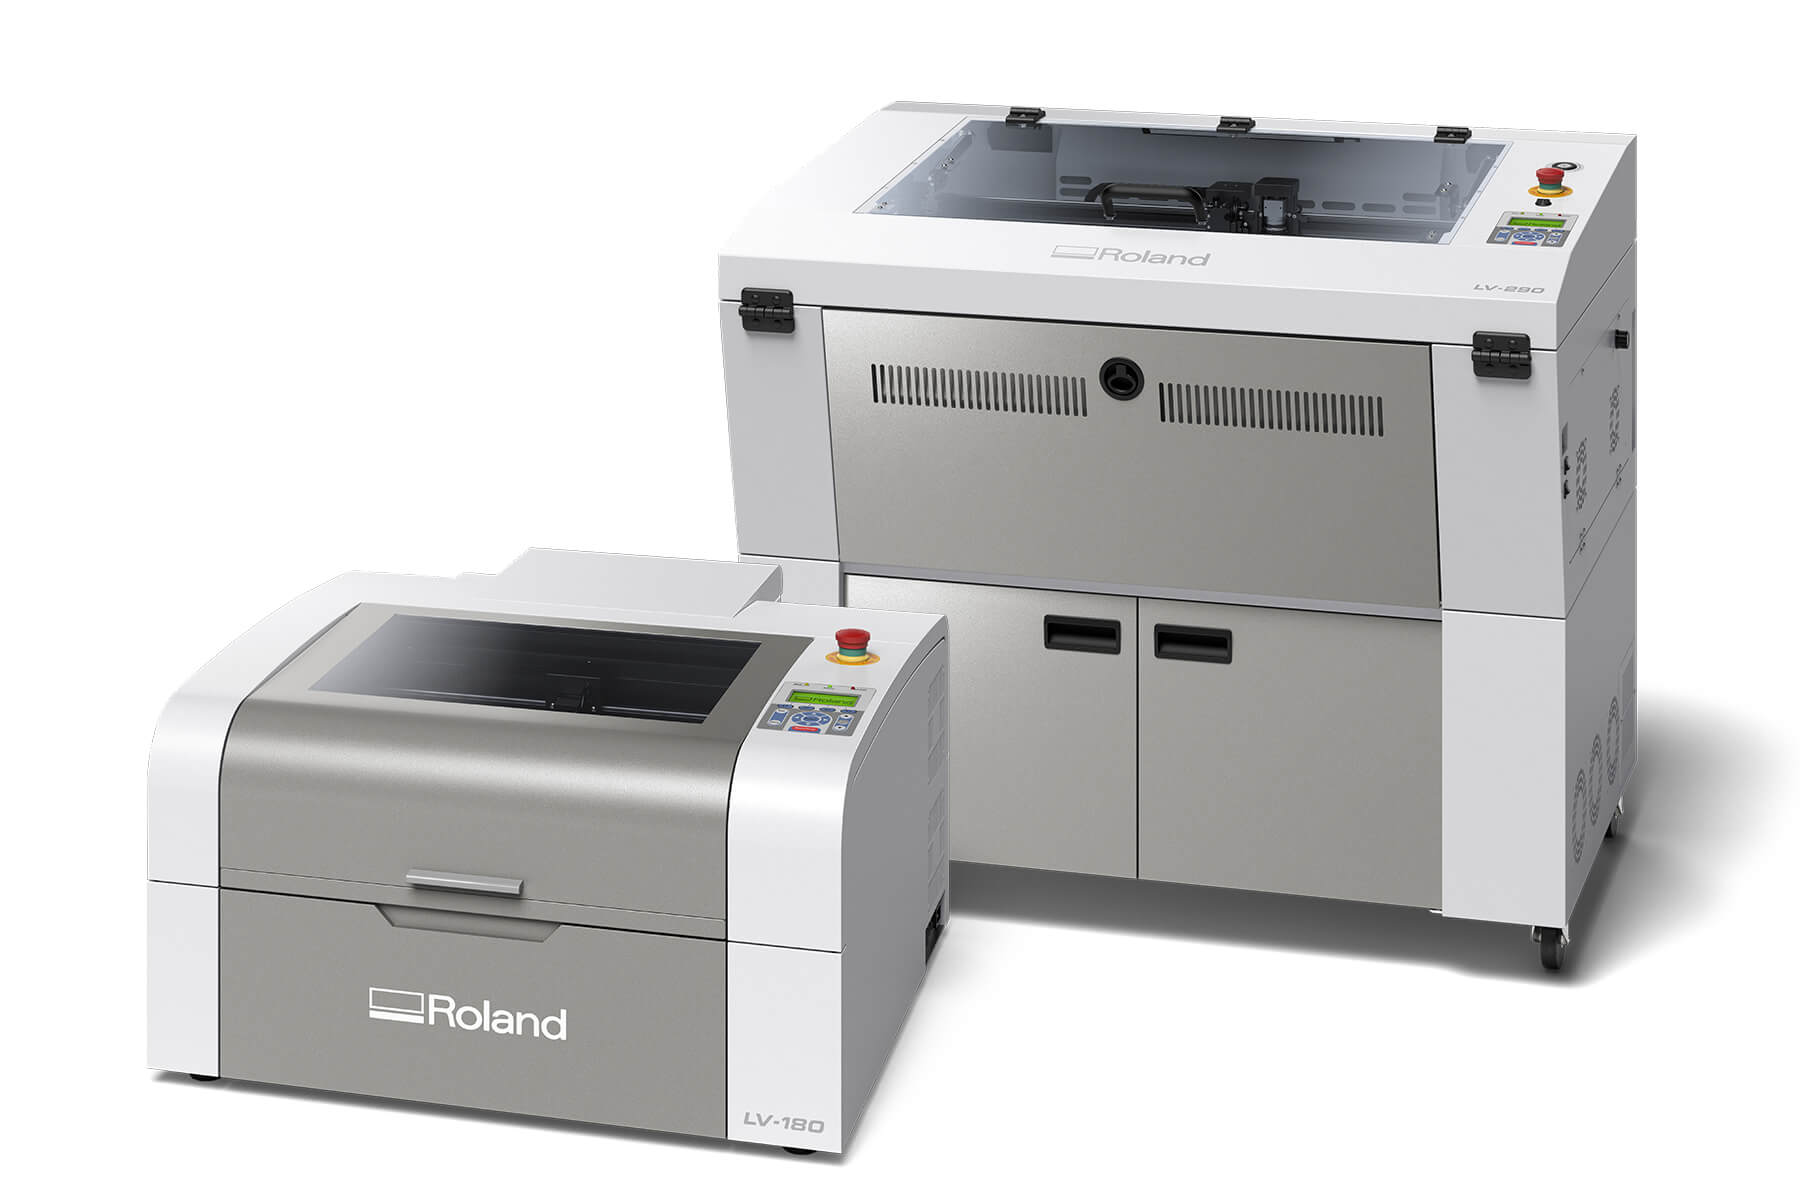 Roland DGA will be showcasing its advanced LV series engravers (shown in photo), as well as its innovative VersaUV LEF2 UV printers, at the 2020 Pacific Design and Engraving Expo.